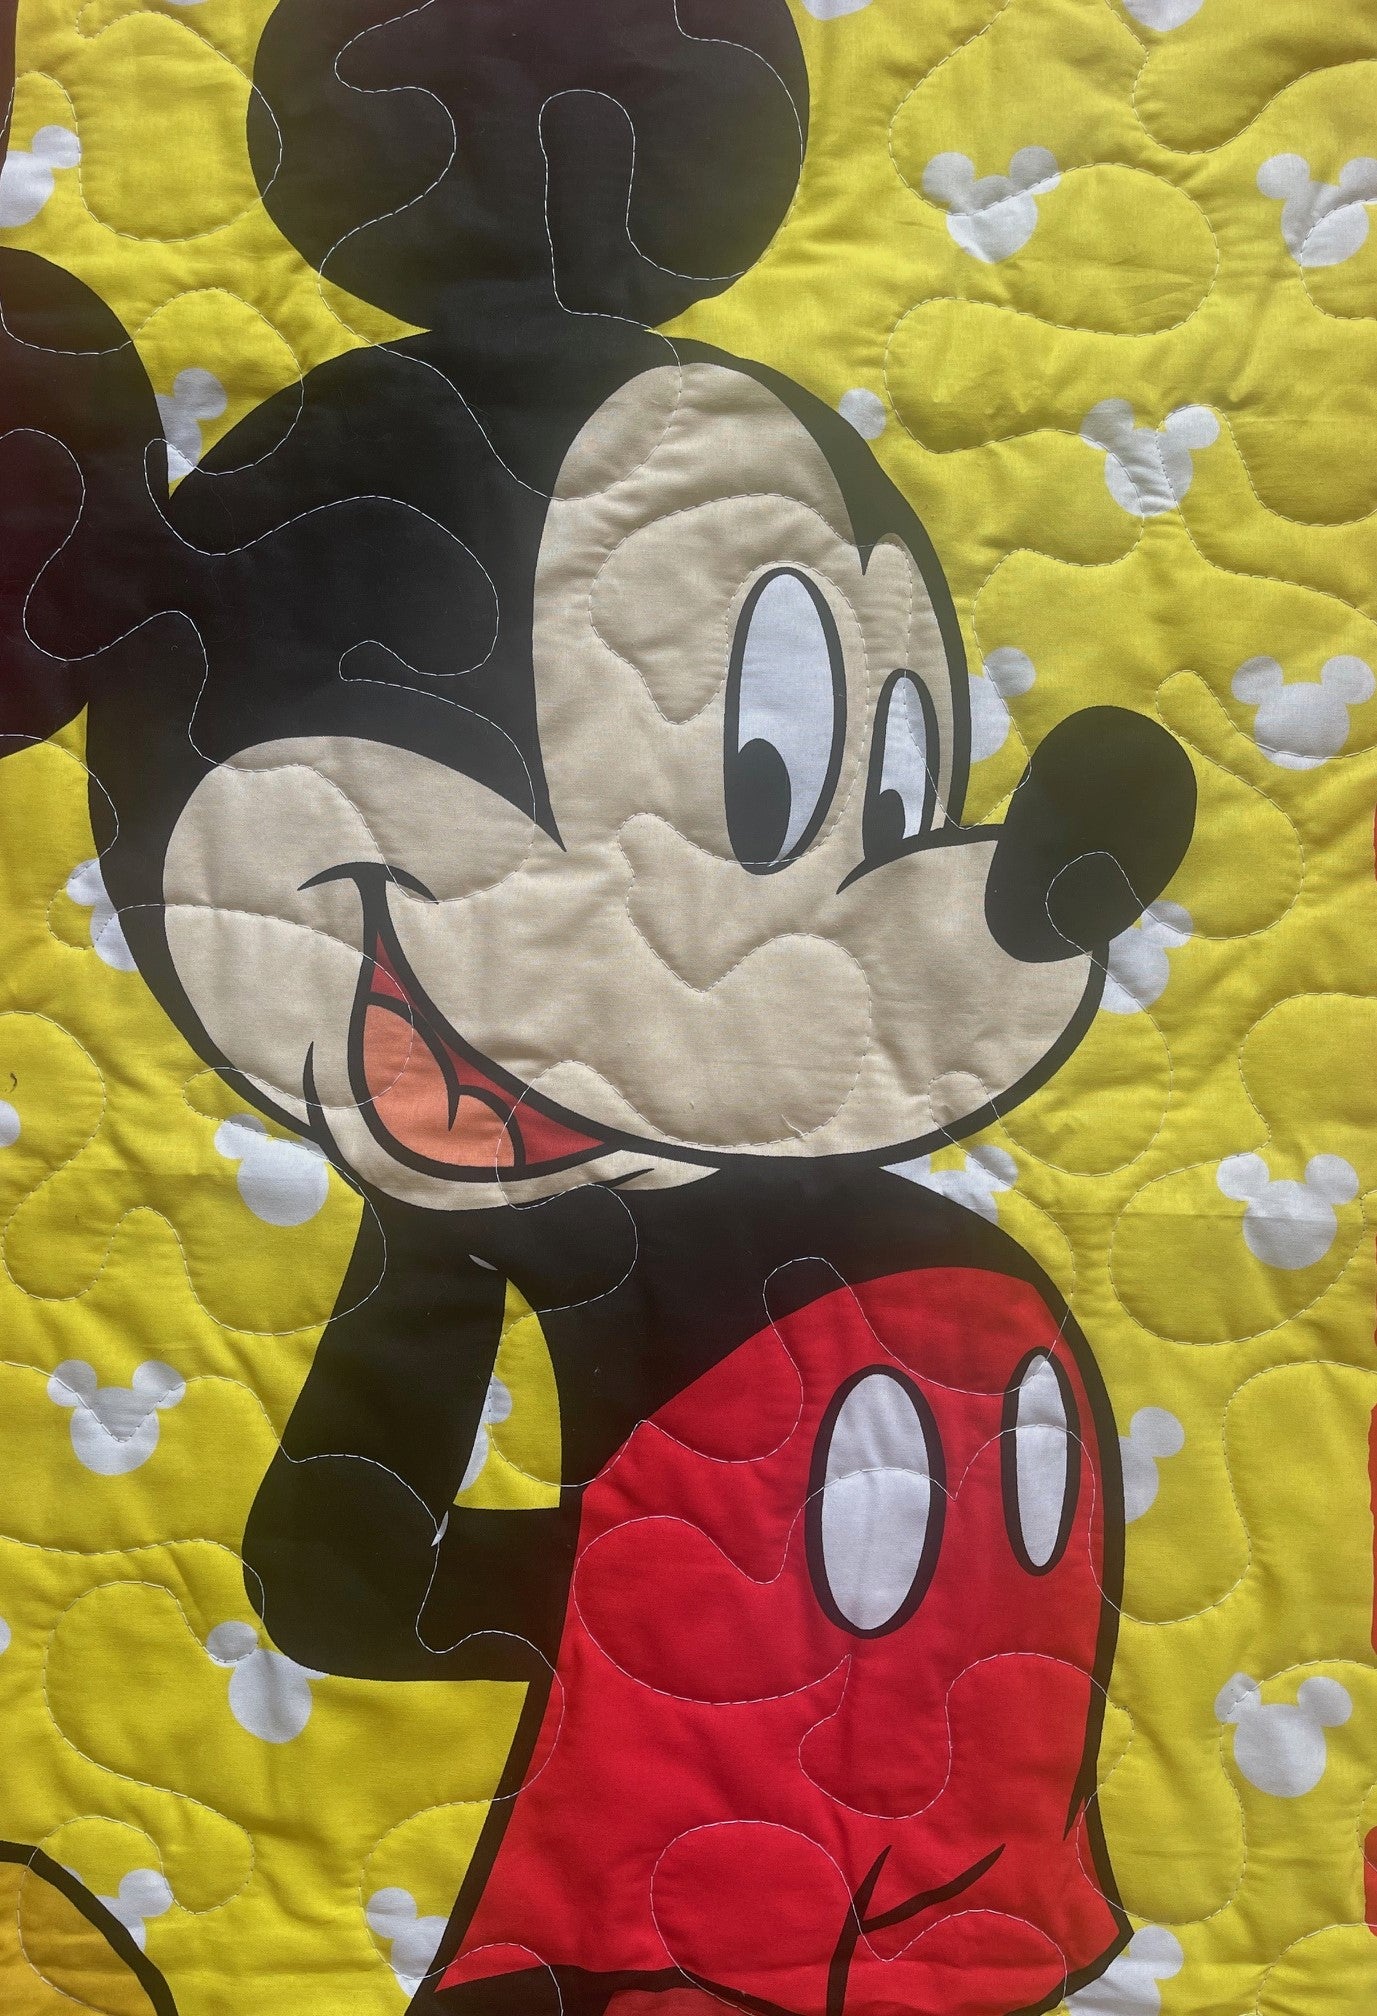 DISNEY CLASSIC MICKEY MOUSE 36"X44" QUILTED BLANKET with Soft Flannel backing